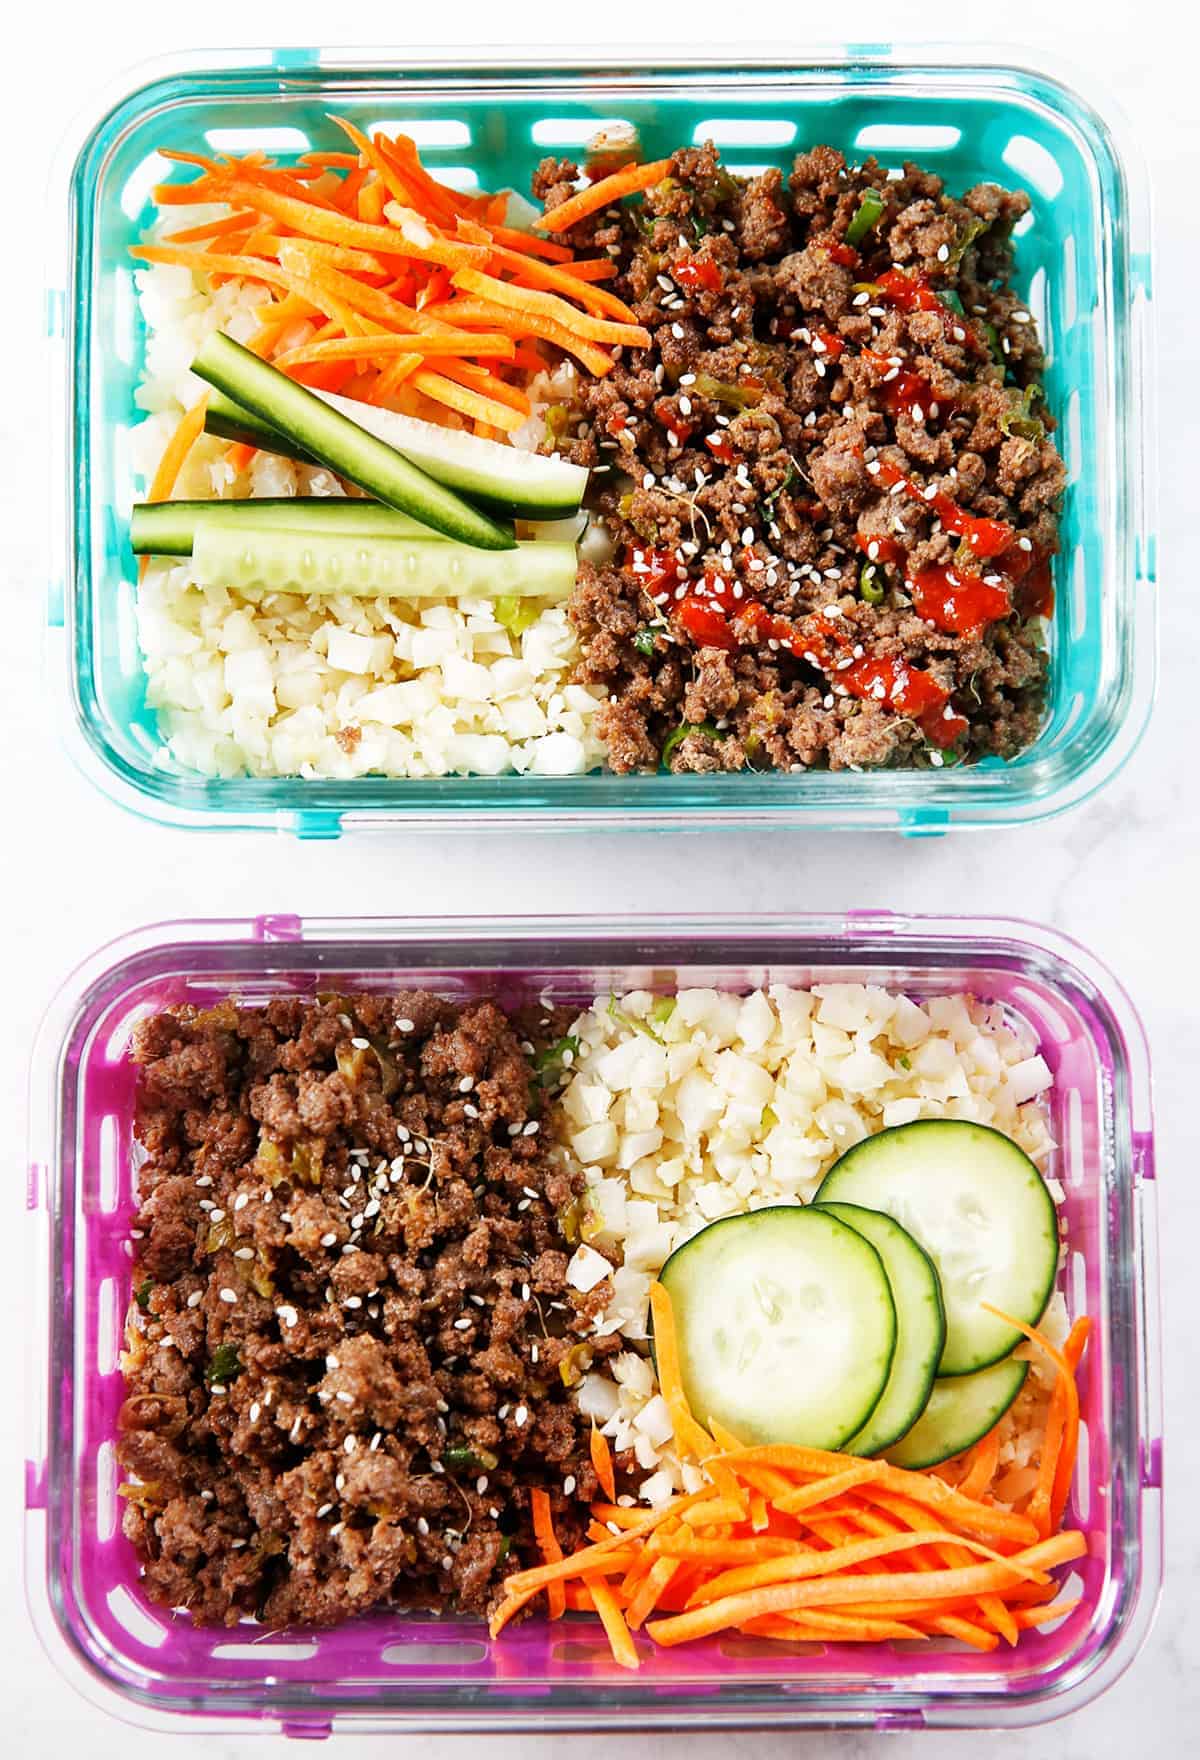 Sweet, salty and with a hint of spice, this Korean Ground Beef recipe is a take on the classic dish of beef bulgogi. Prepared in well under 20 minutes, these Korean Ground Beef Bowls are simple to prepare, so delicious and absolutely perfect for meal prep! This dish is also dairy and gluten free, as well as low-carb and paleo-friendly.